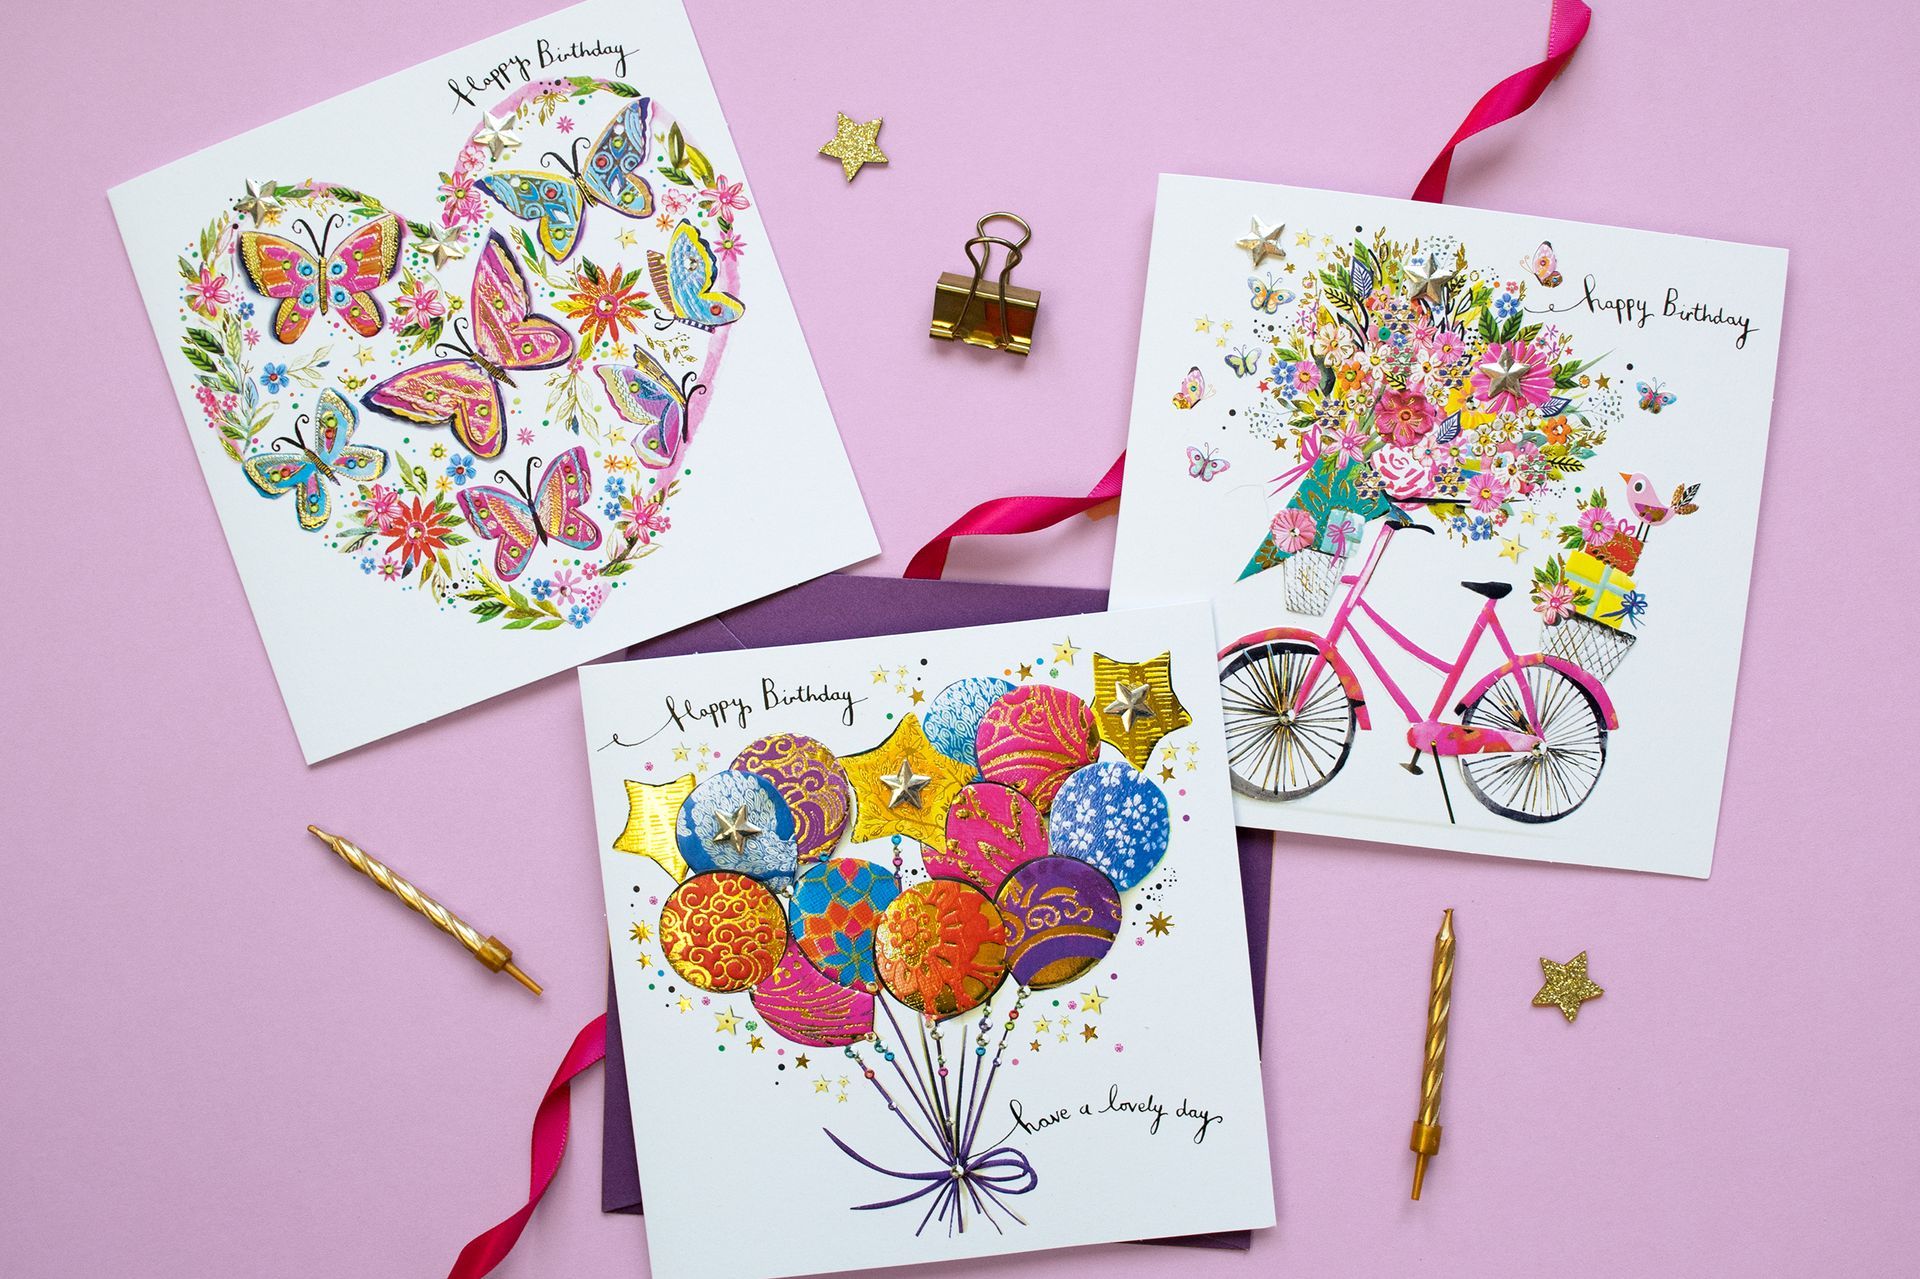 Image of pastel floral cards finished with gold foil